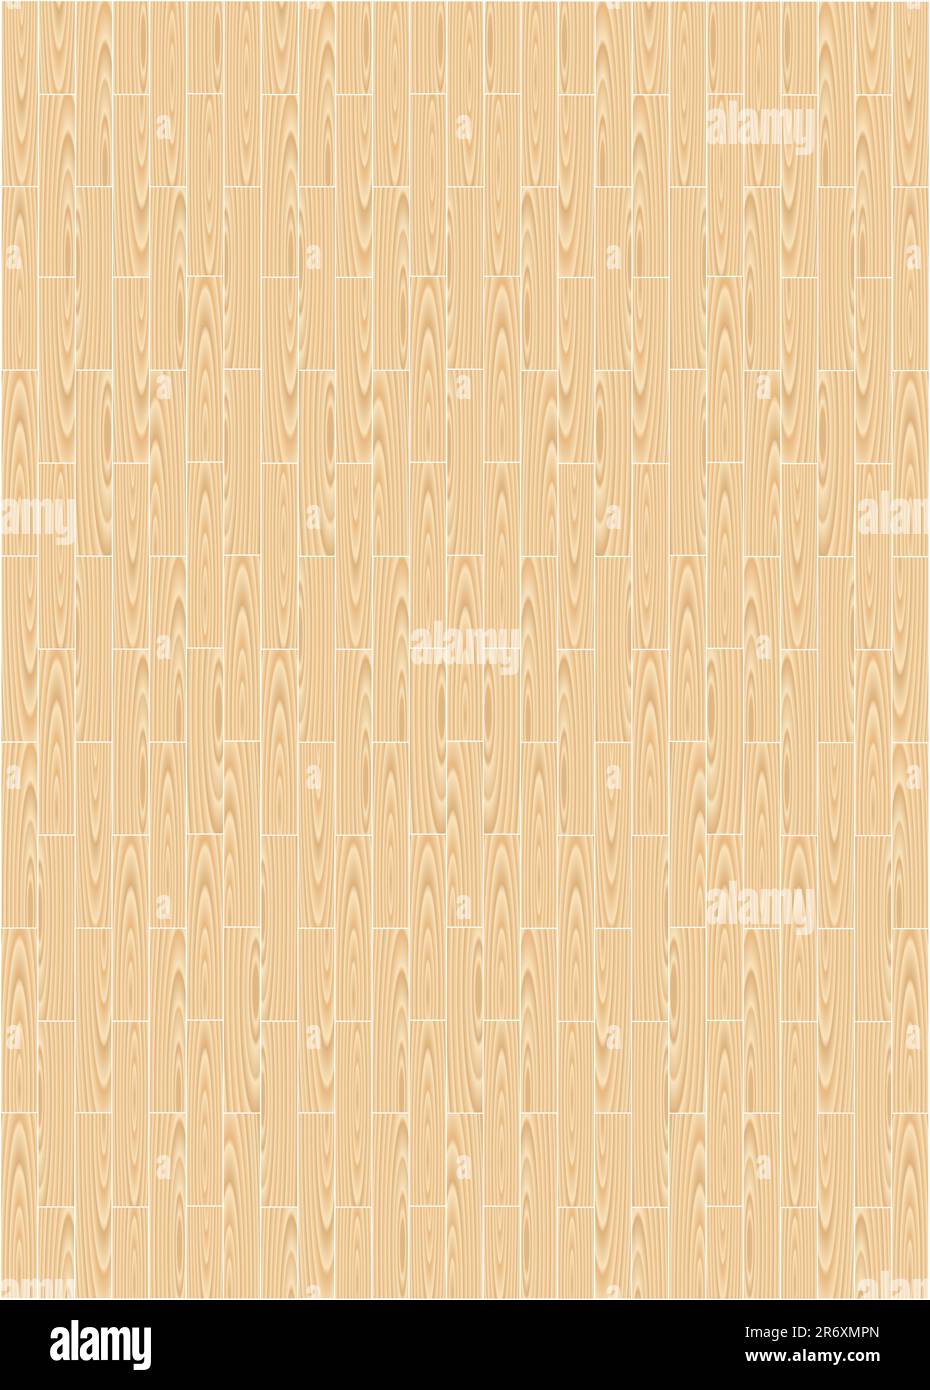 Wood floor parquets on the white background Stock Vector